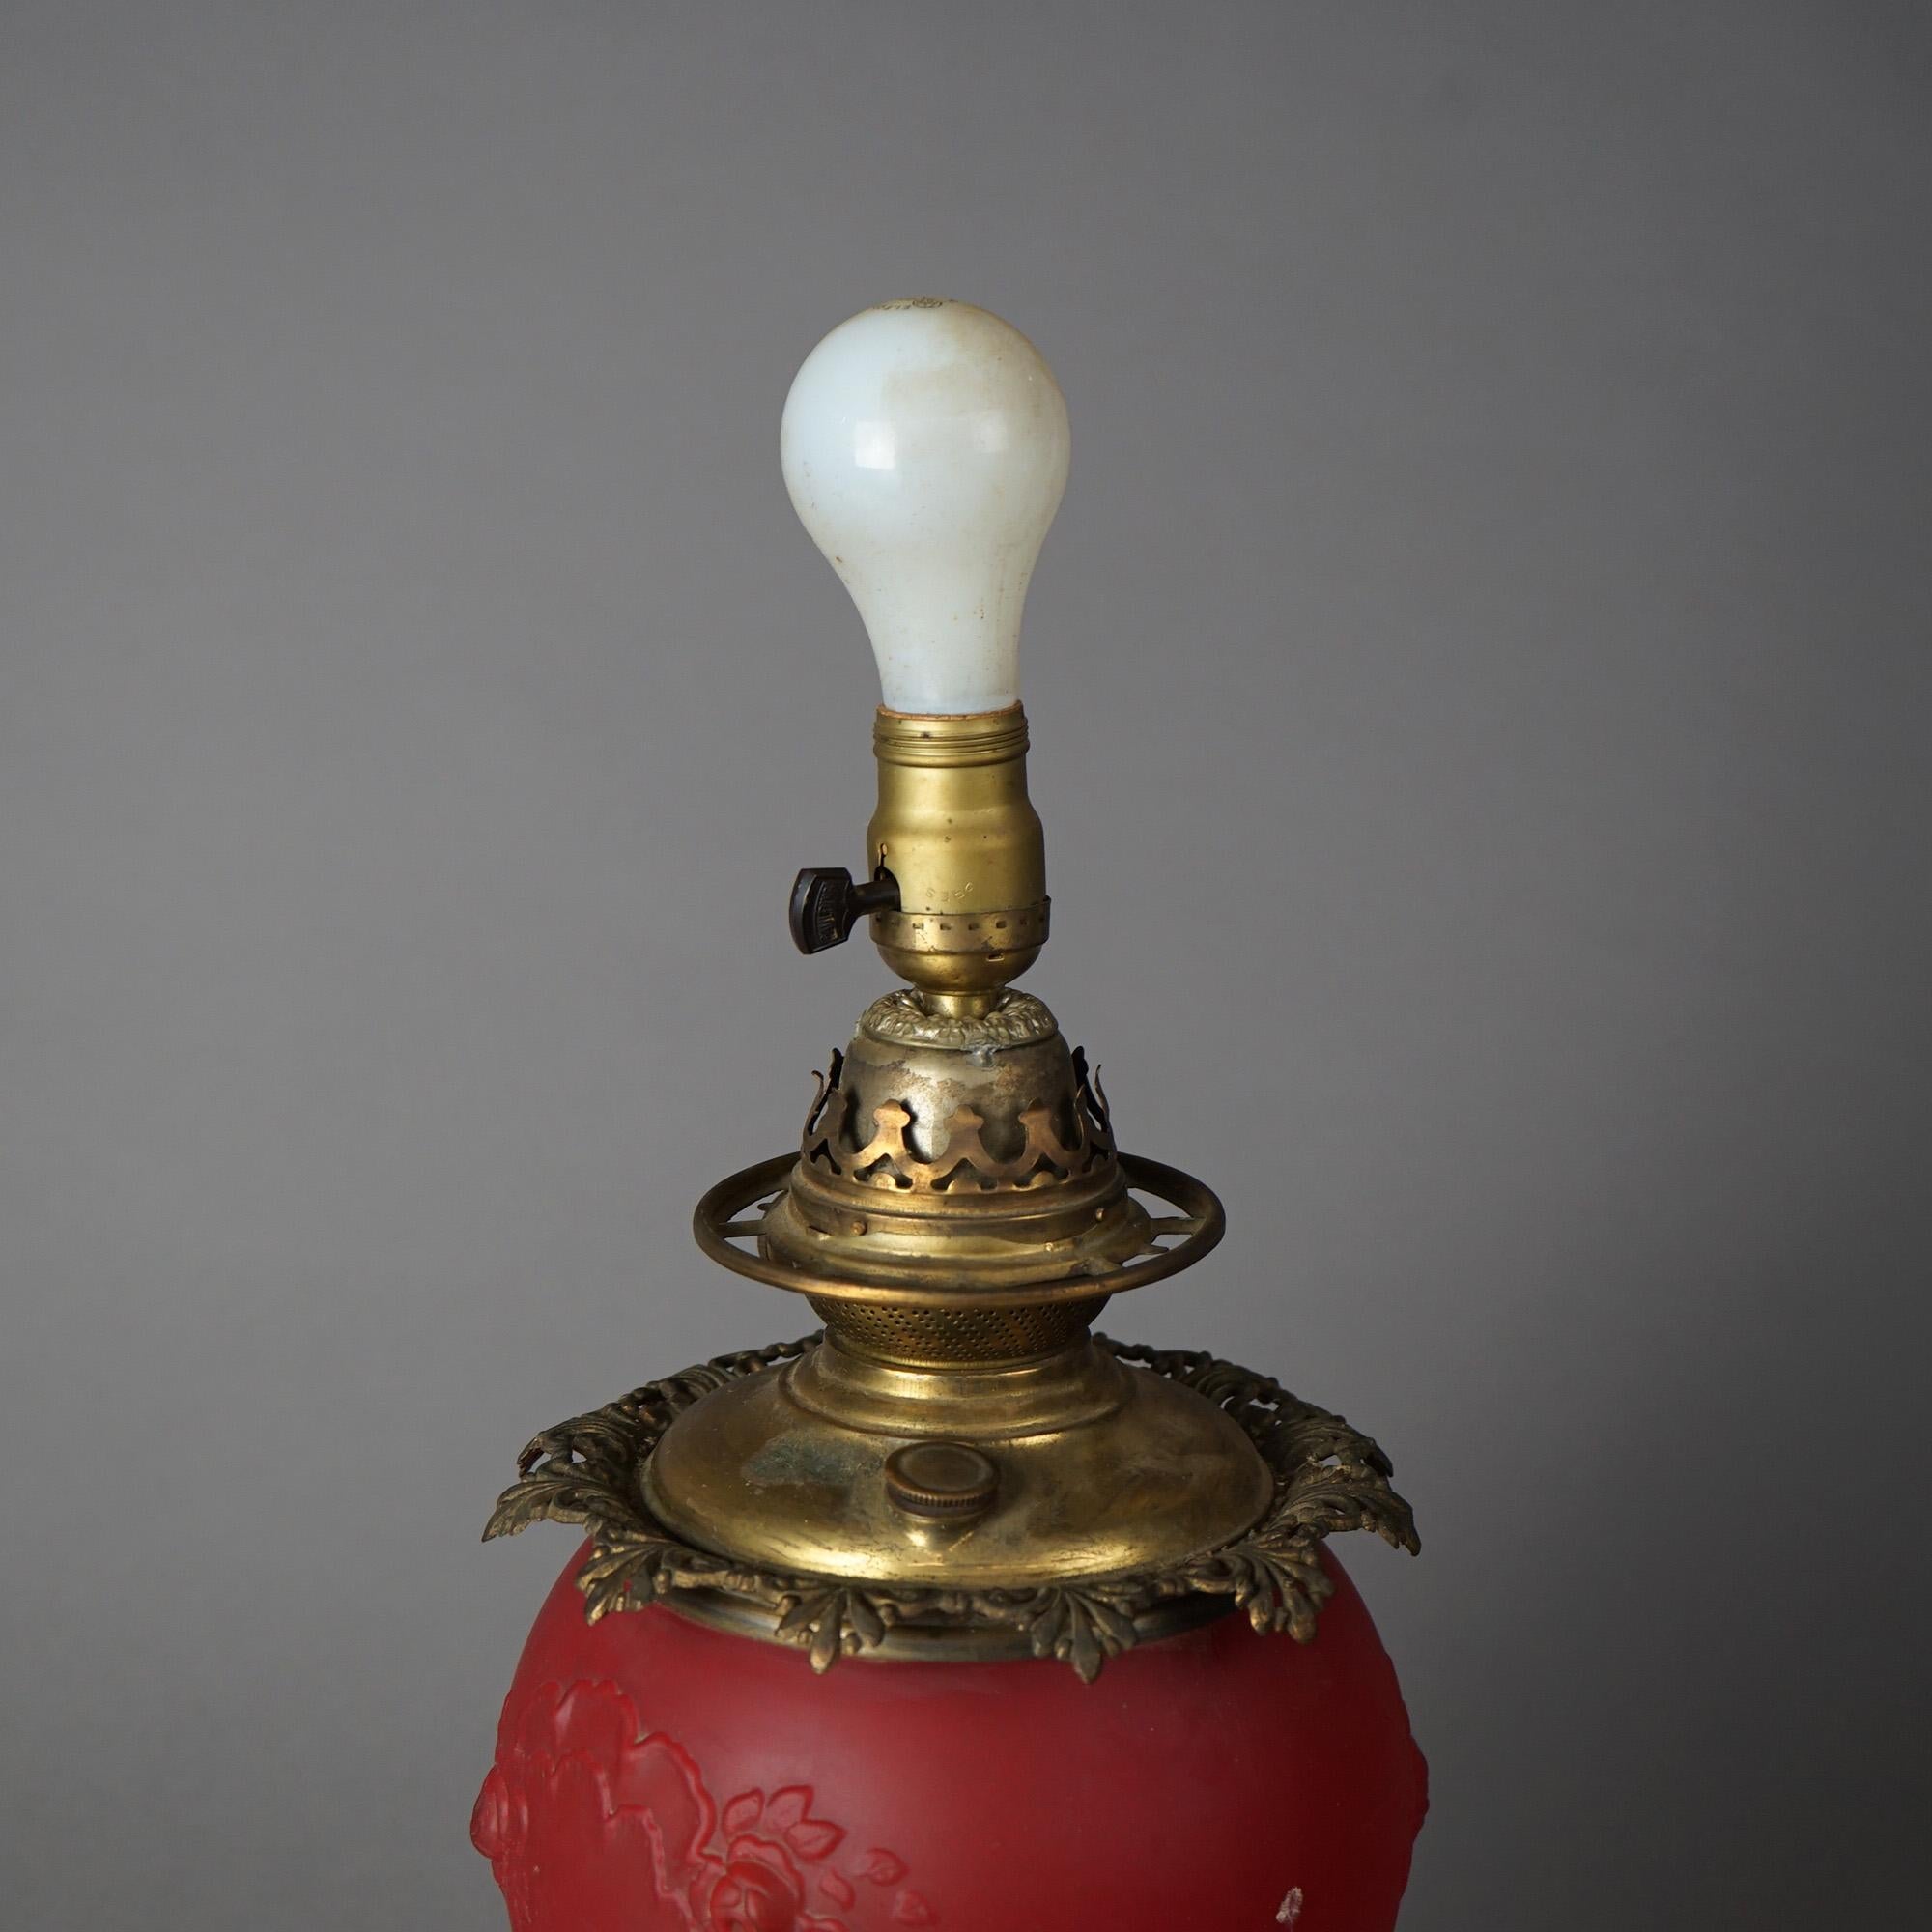 Antique Brass & Cranberry Glass Gone With The Wind Floral Embossed Lamp c1890 For Sale 2